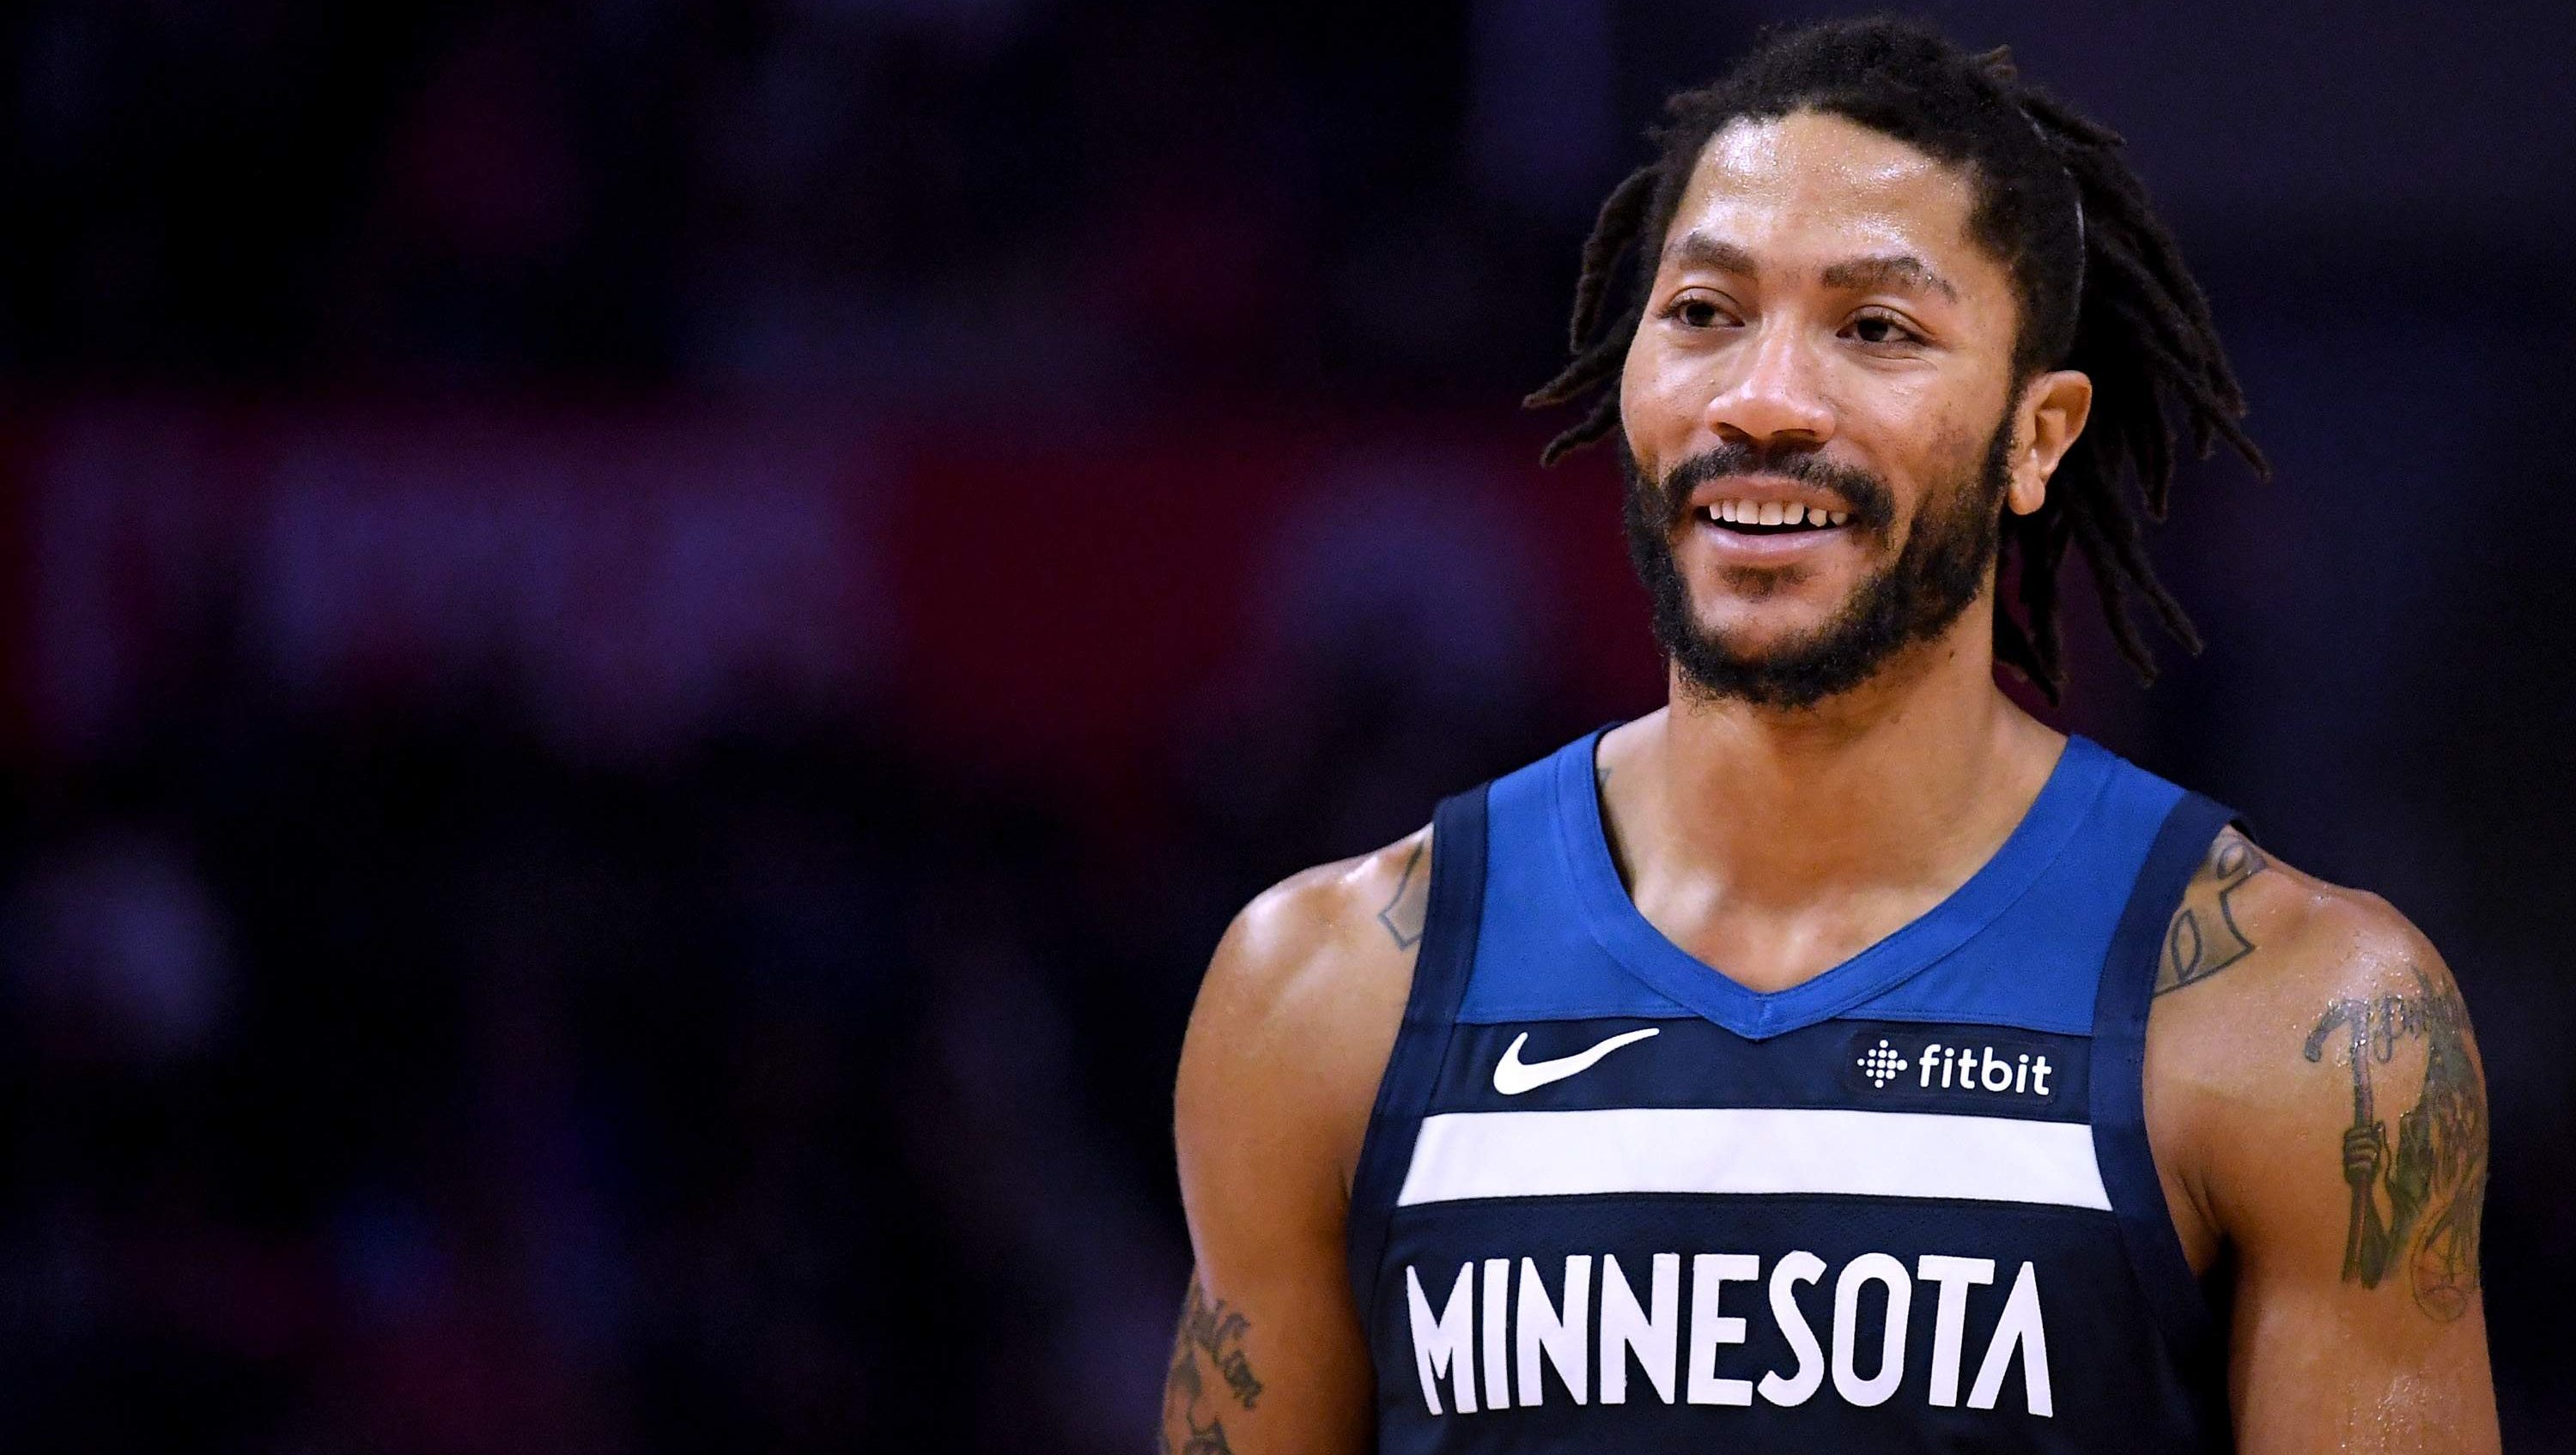 Derrick Rose 5 Fast Facts You Need to Know